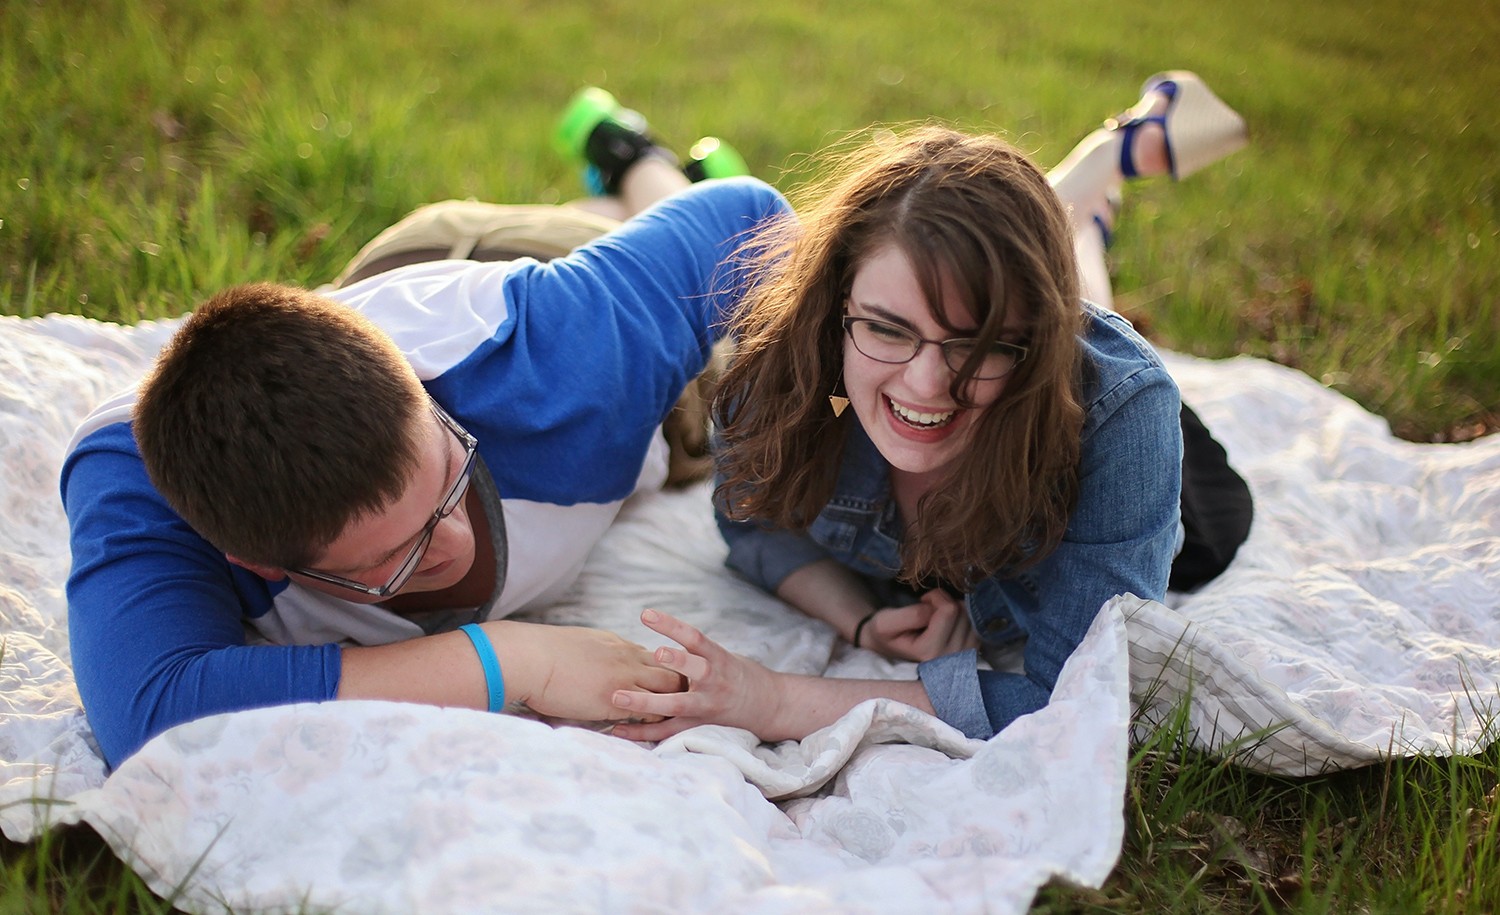 A couple laughing together on a picnic blanket